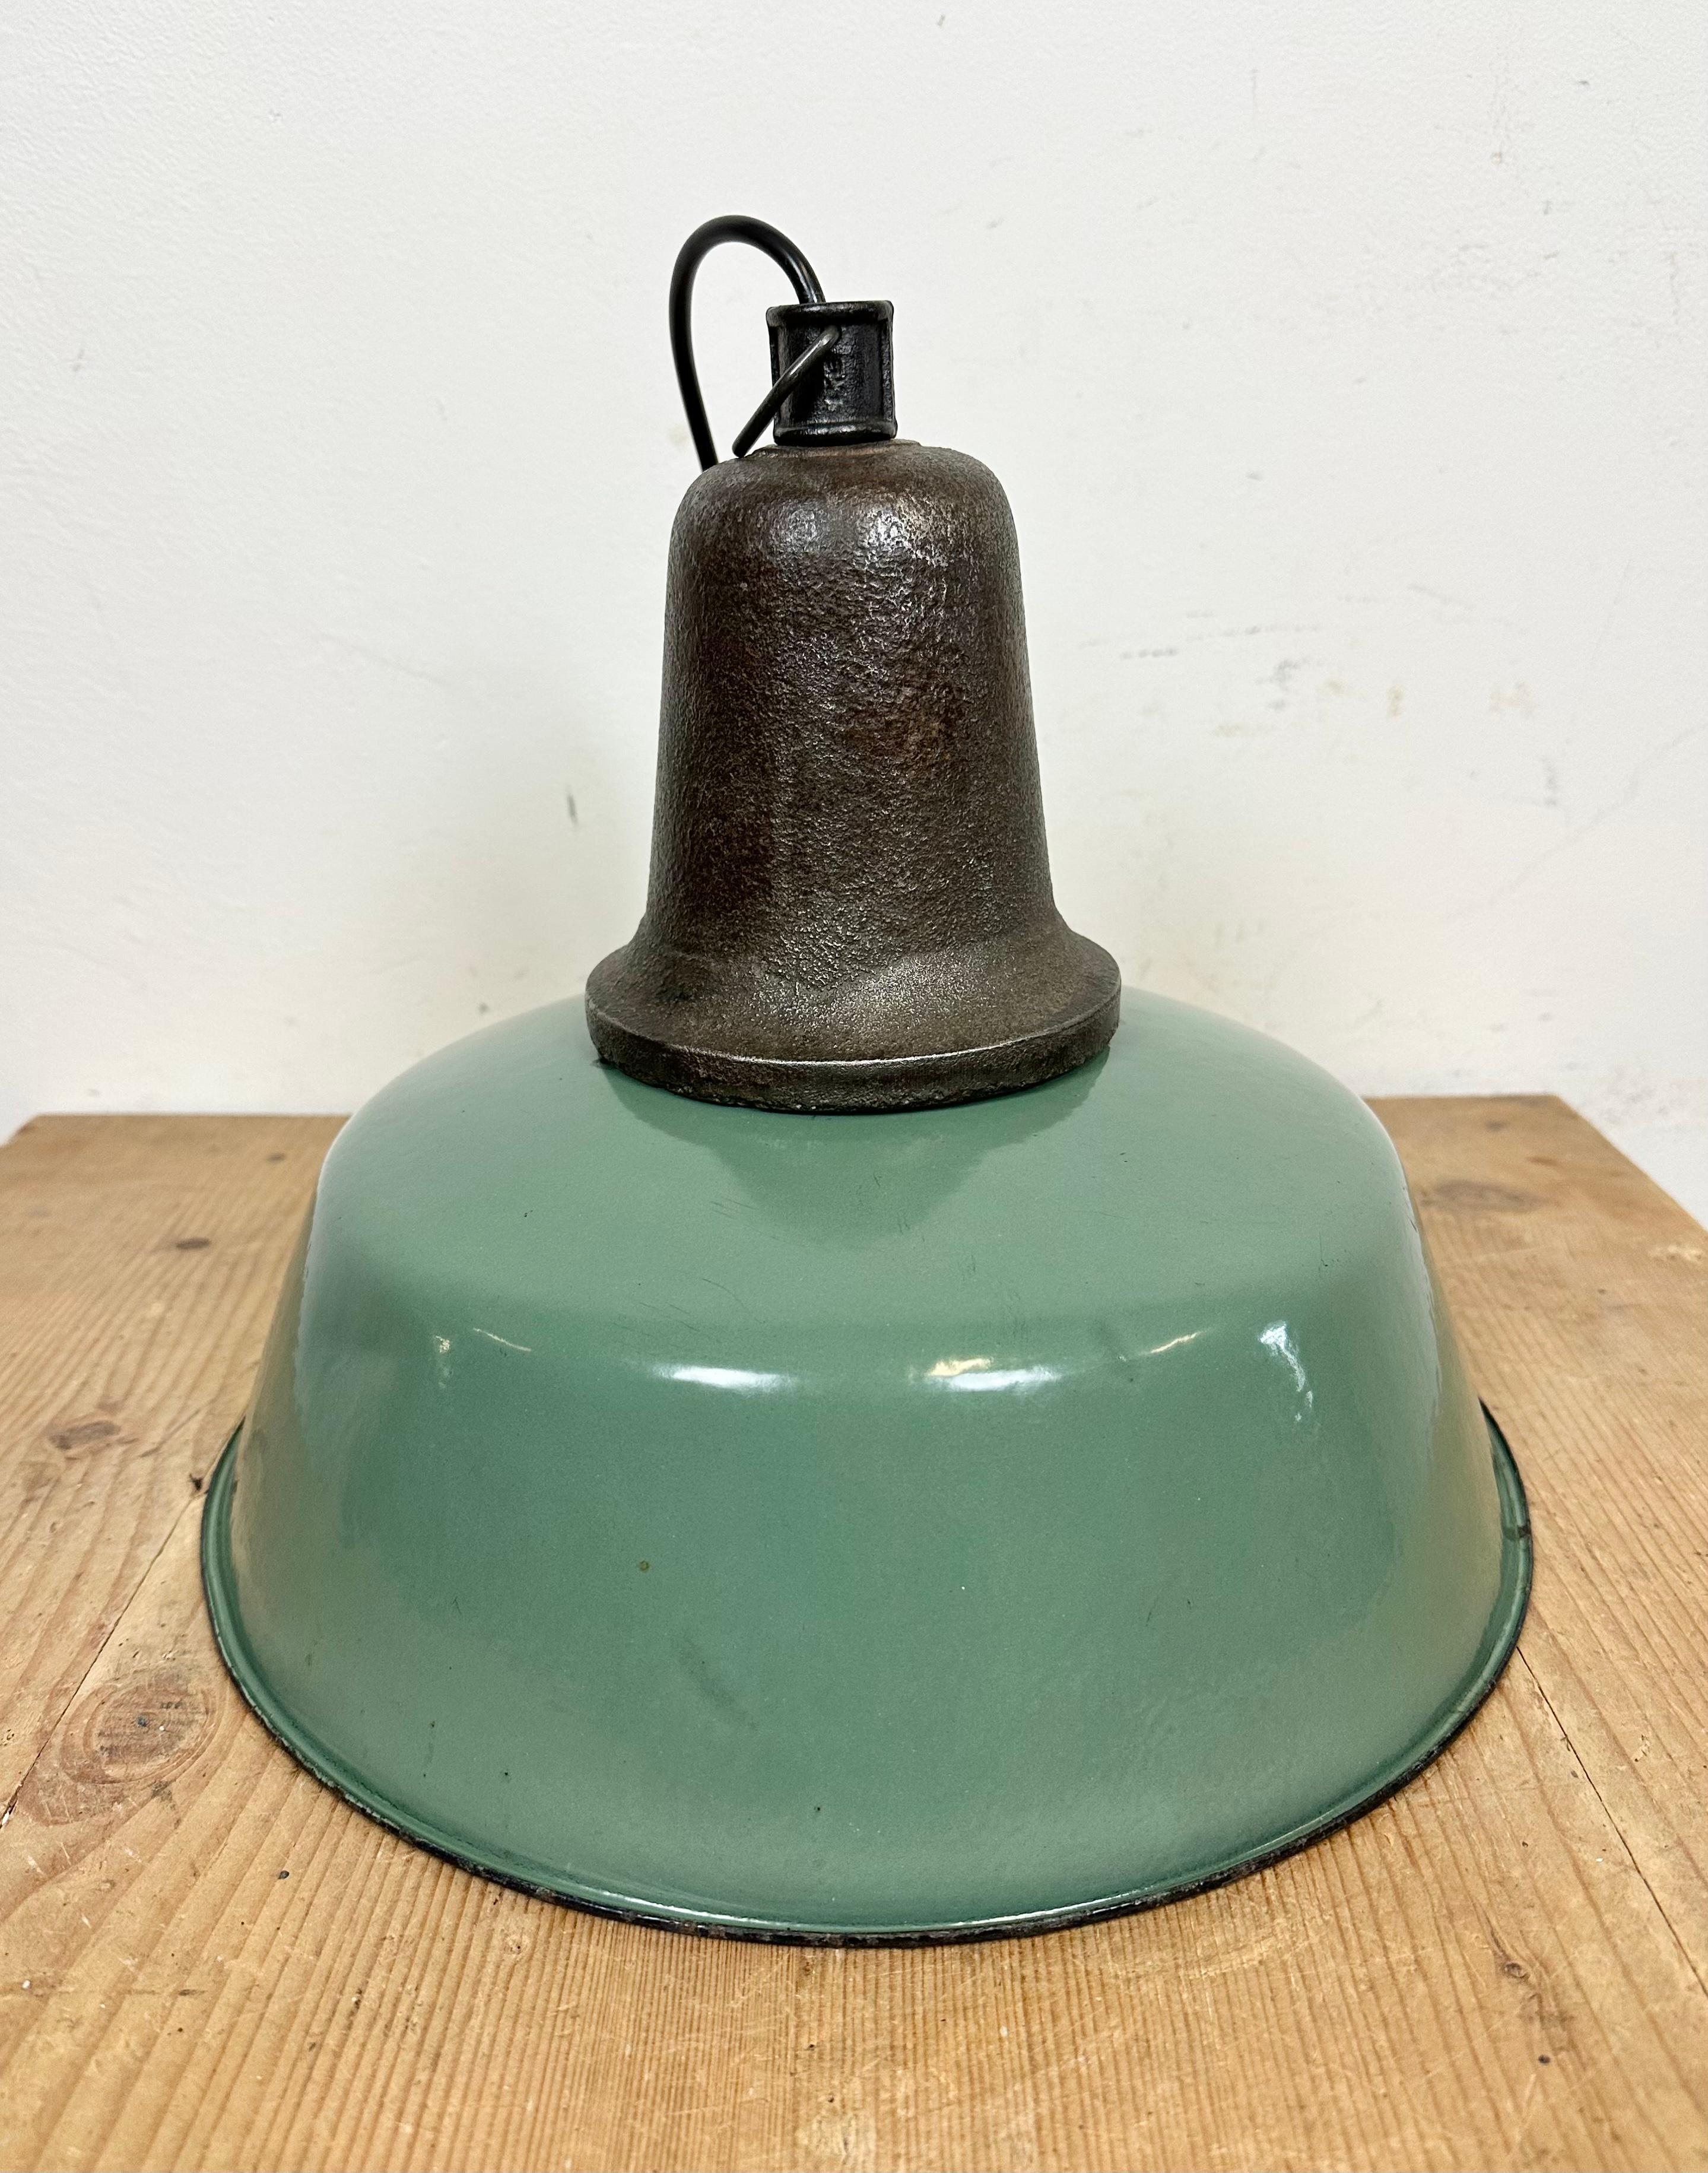 Industrial green enamel pendant light made in Poland during the 1960s. White enamel inside the shade. Cast iron top. The porcelain socket requires E 27/ E26 light bulbs. New wire. Fully functional. The weight of the lamp is 2.5 kg.